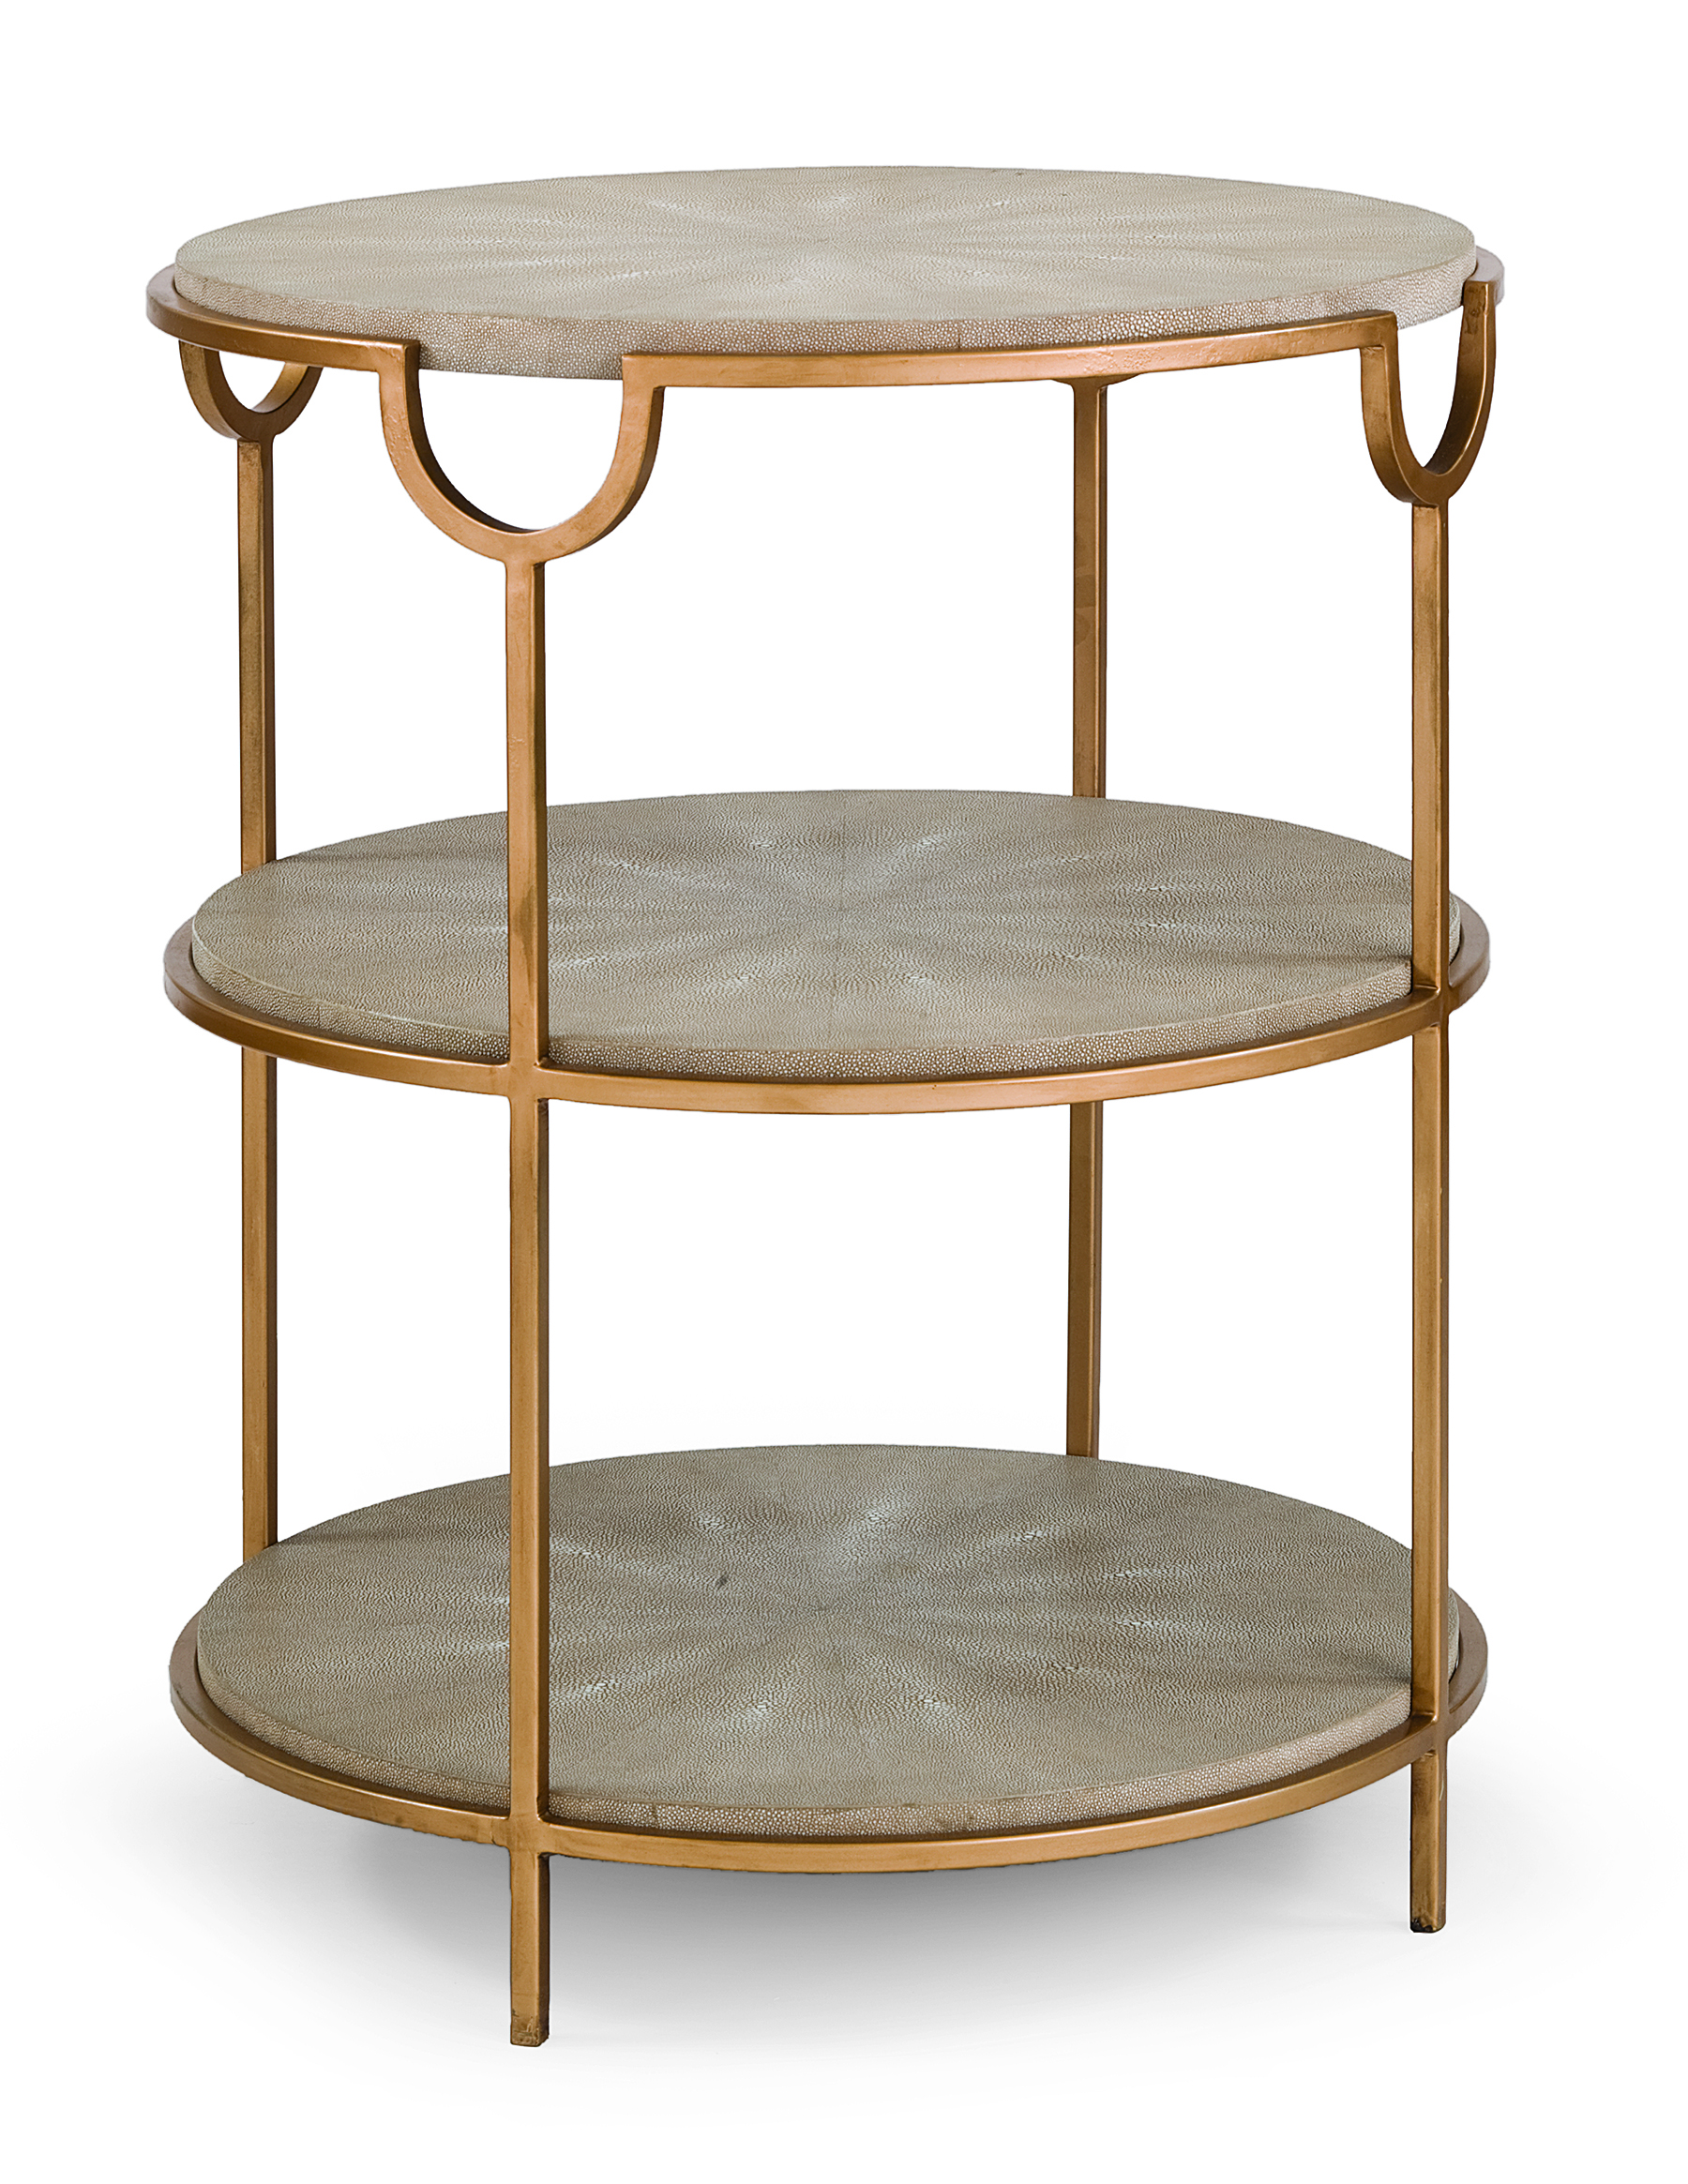 Vogue Shagreen side table with three golden tiers from Regina Andrew Design